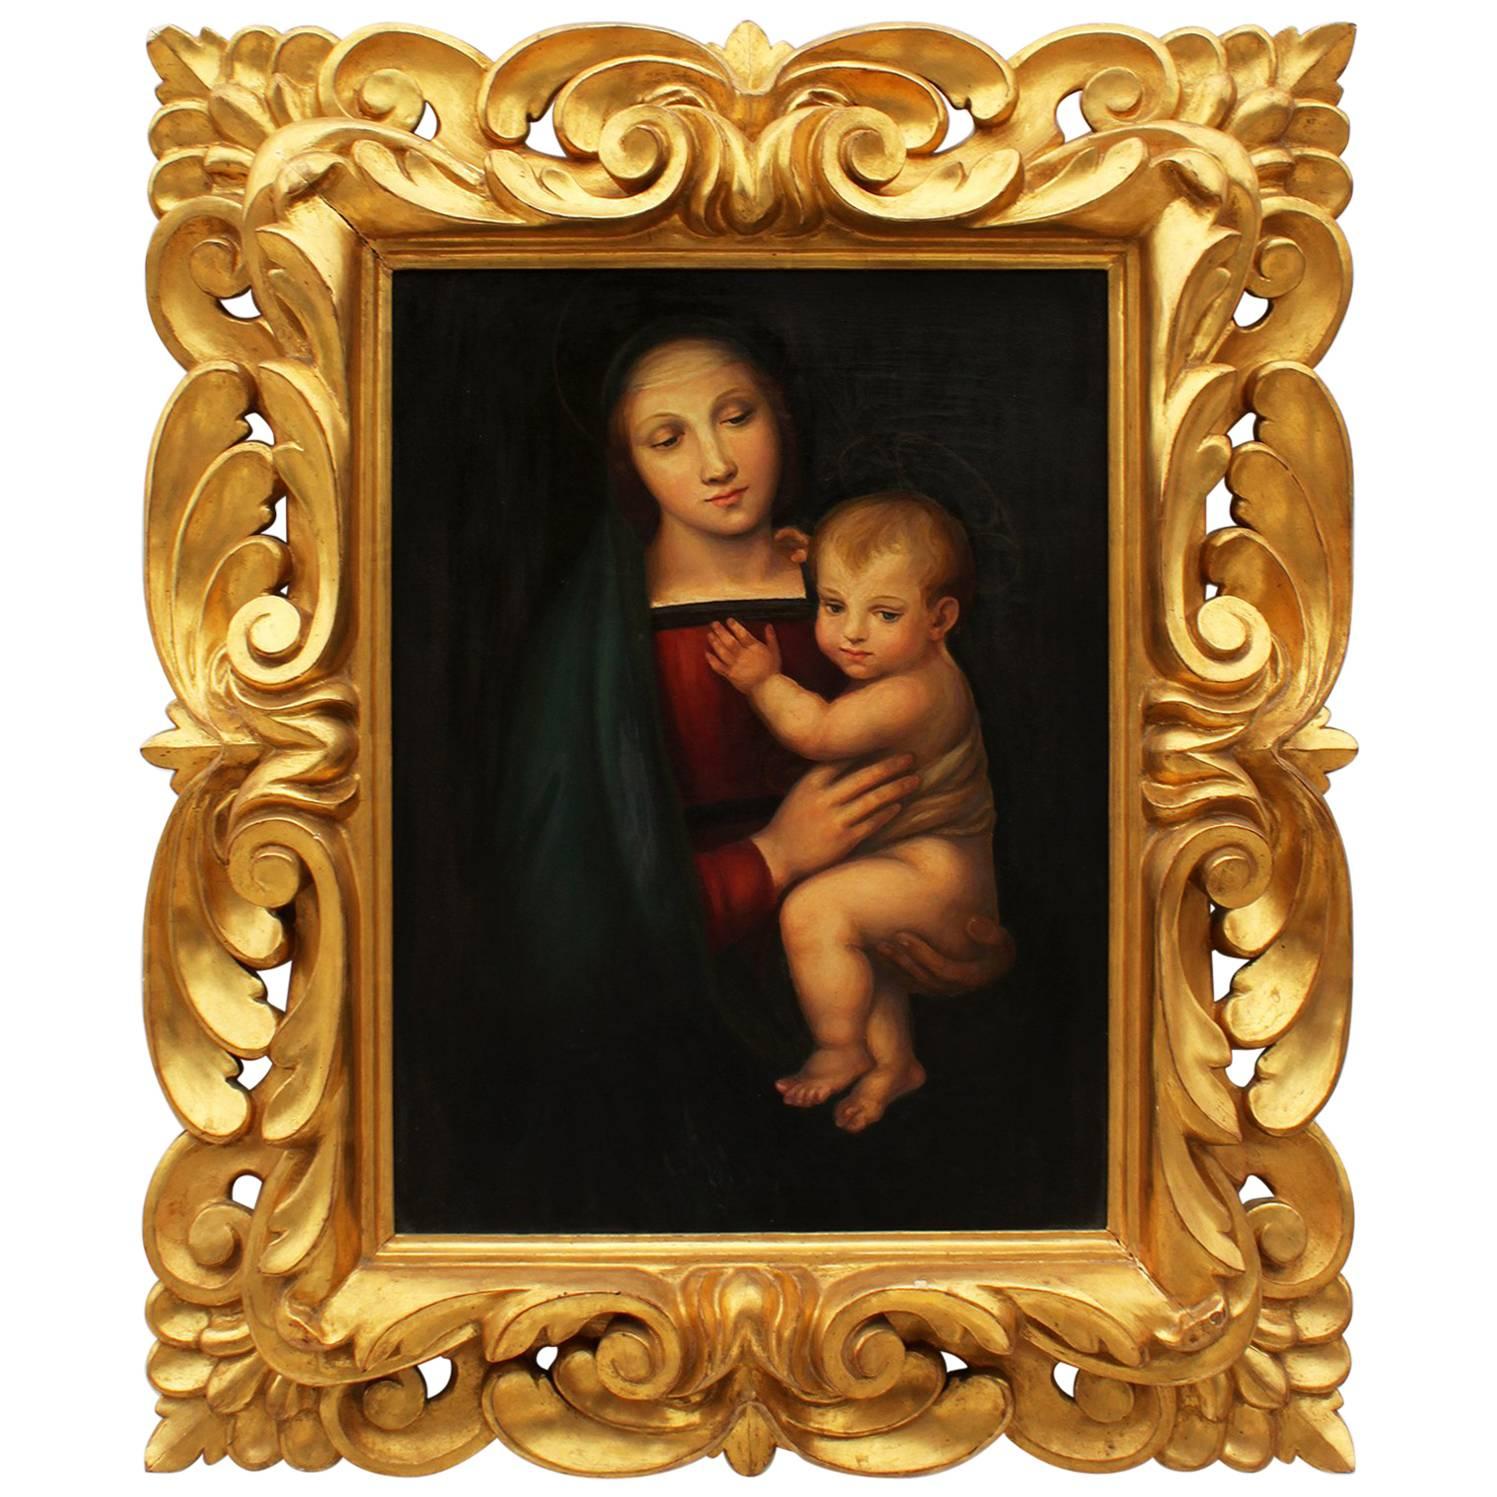 Italian 19th Century Renaissance Revival Oil on Canvas of a "Madonna and Child"